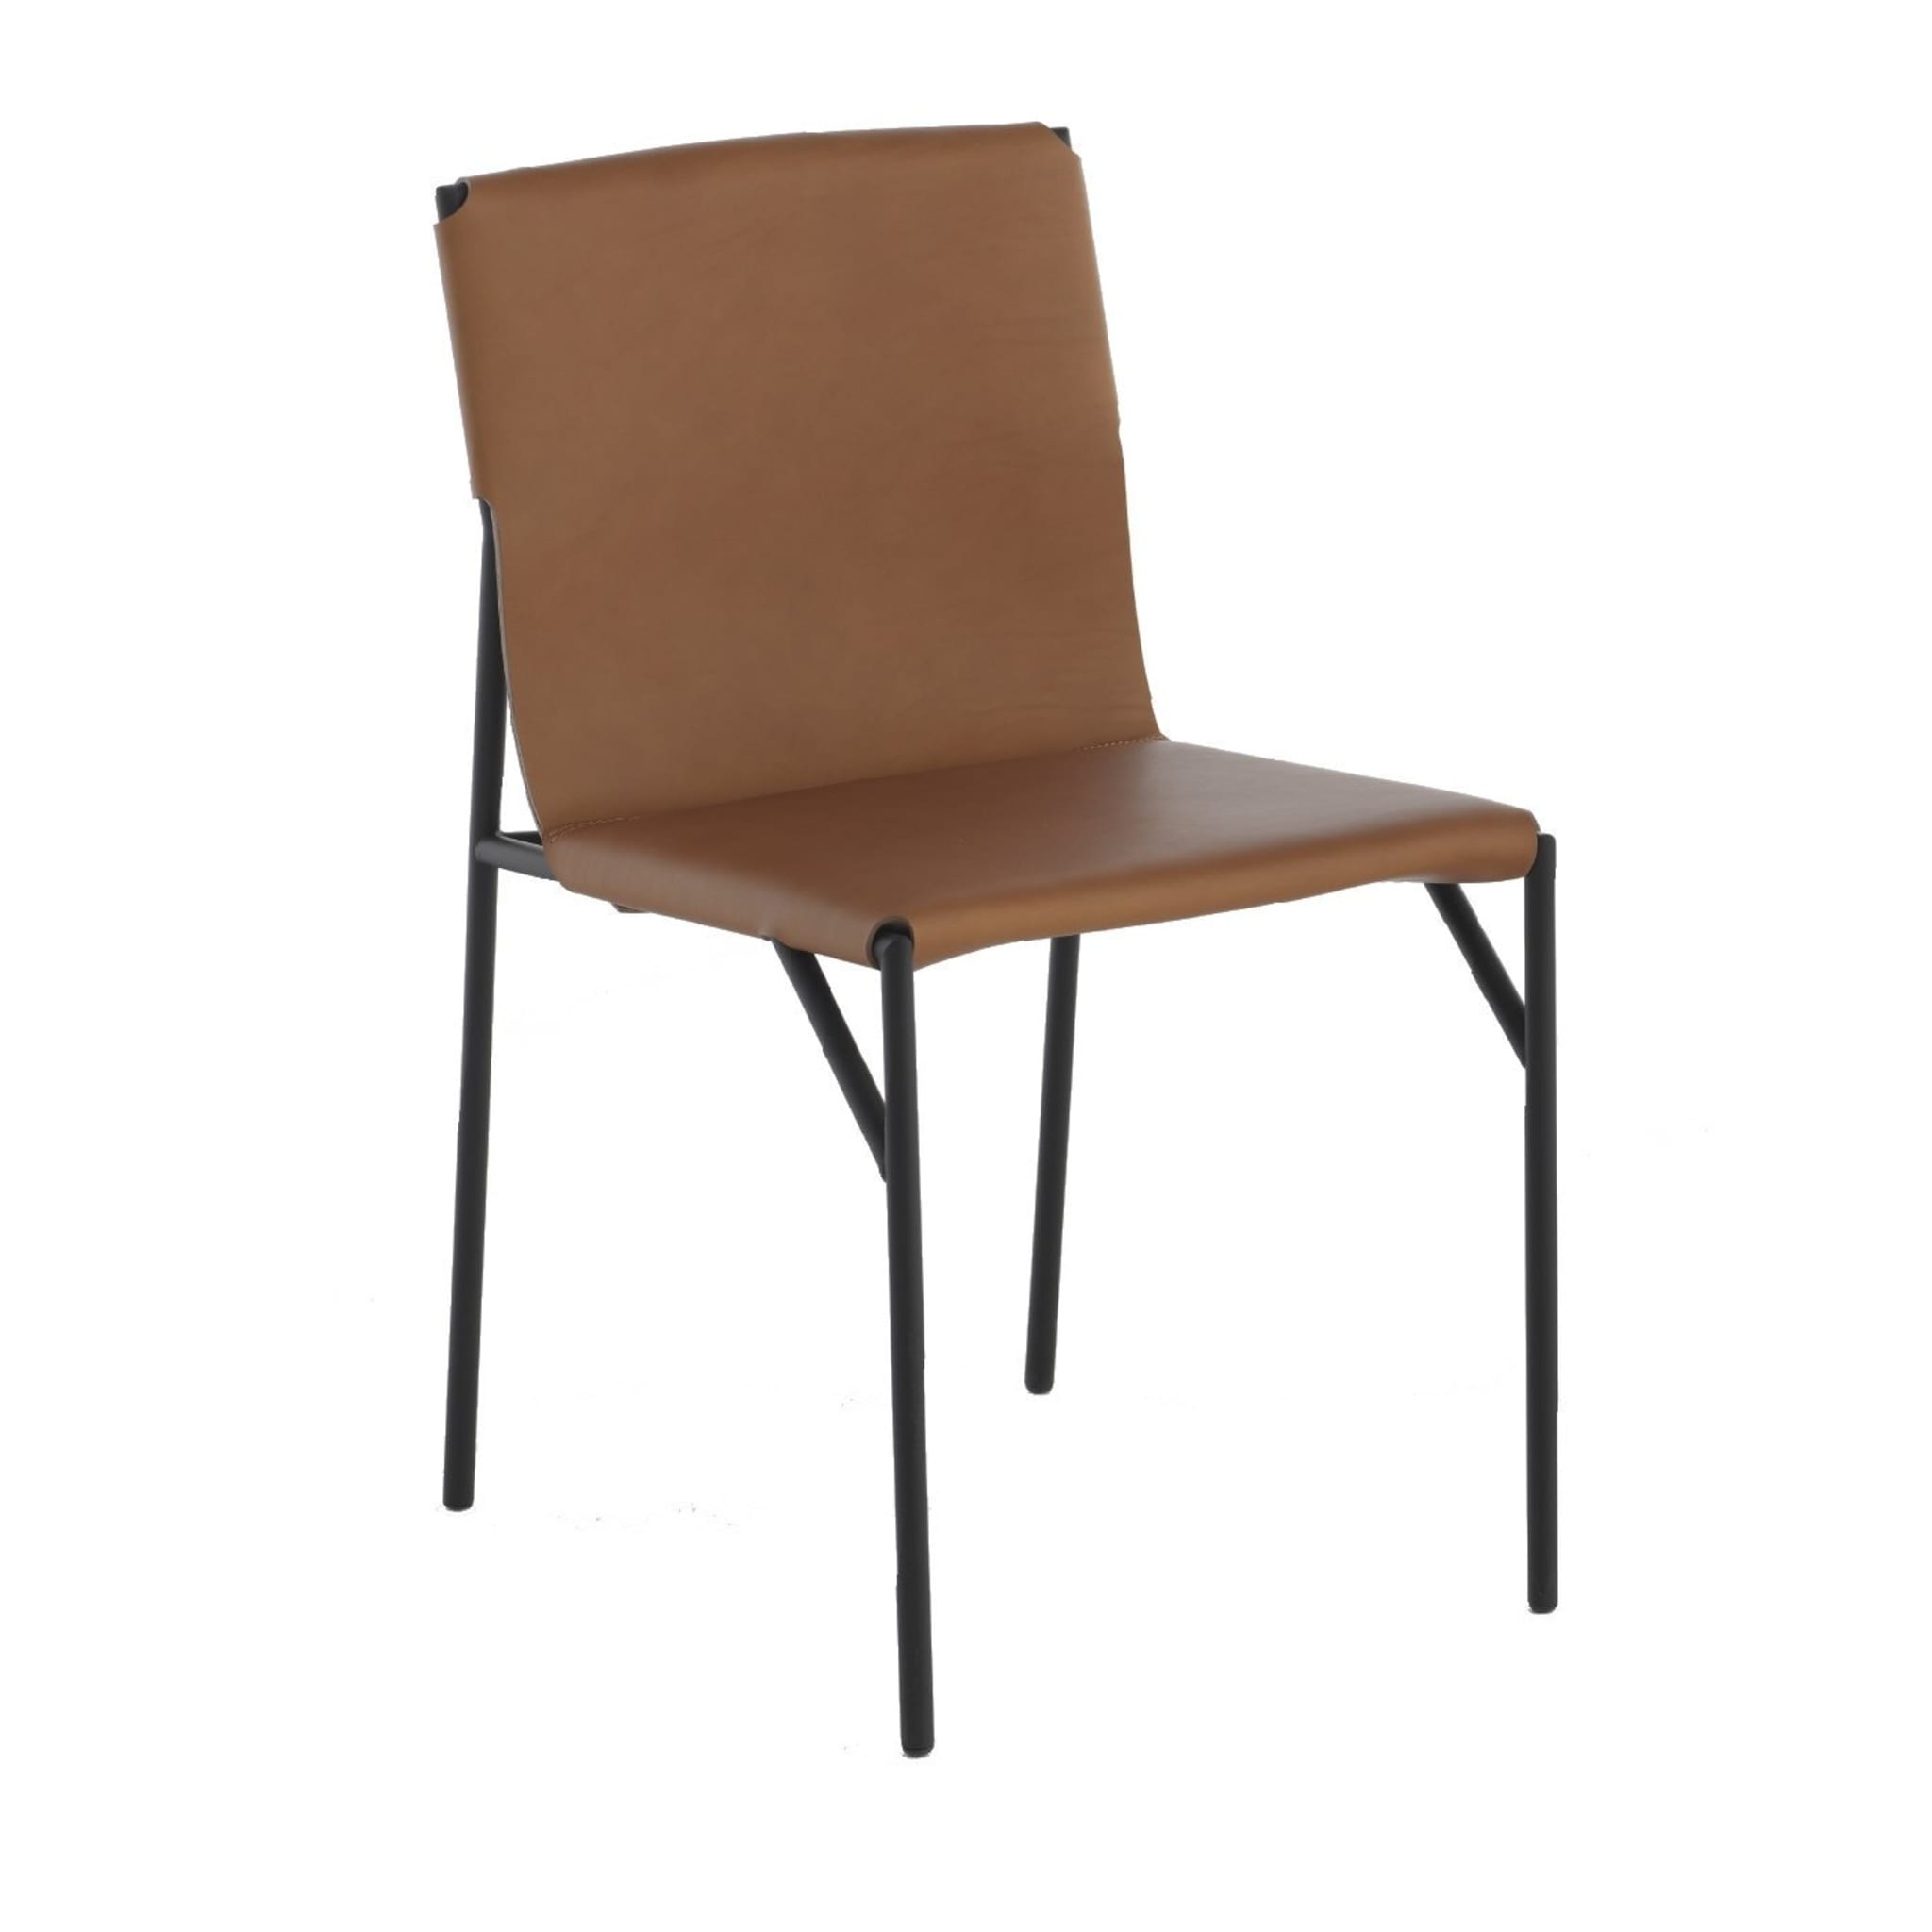 Tout Le Jour Natural Leather Chair by Marc Thorpe - Main view